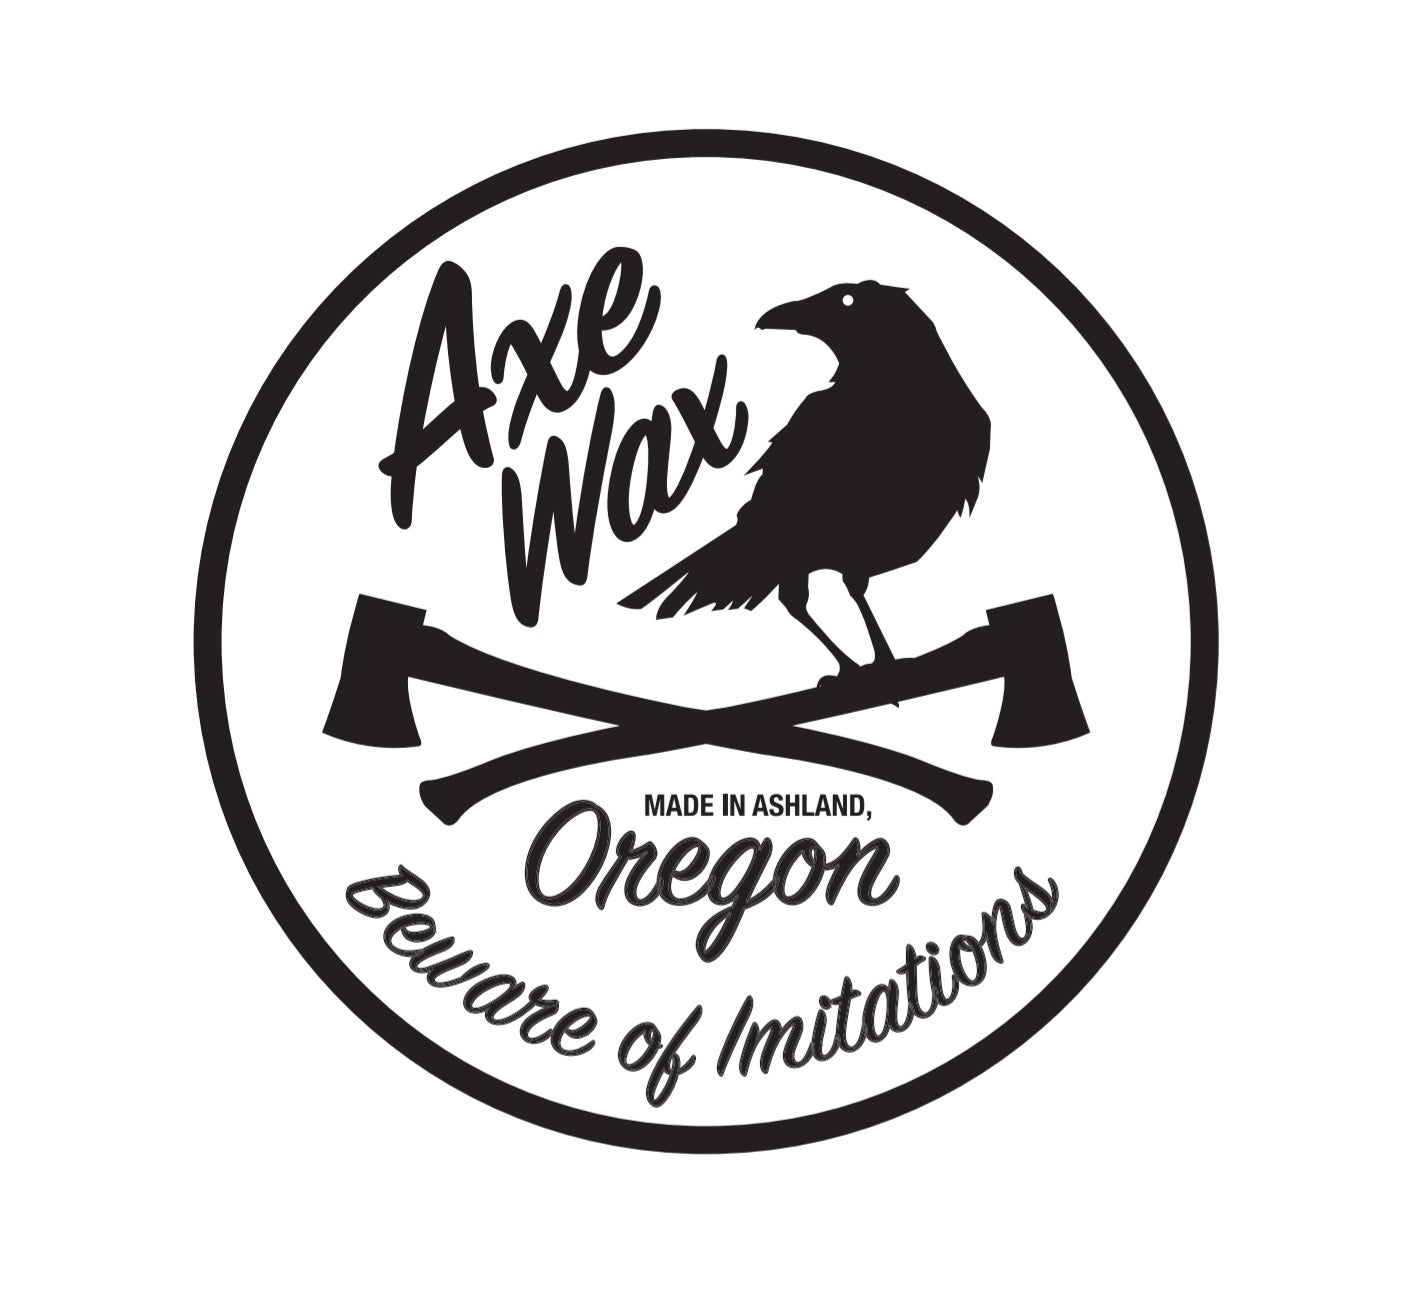 Axe Wax Premium Blade Care - 2oz (60ml) of Quick-Drying Wax for Protecting  and Restoring Axes, Knives, EDC, Damascus, San-Mai, Carbon Steel, Gun  Stocks, Knife, Wood Cutting board, Leather, and More : Handmade Products 